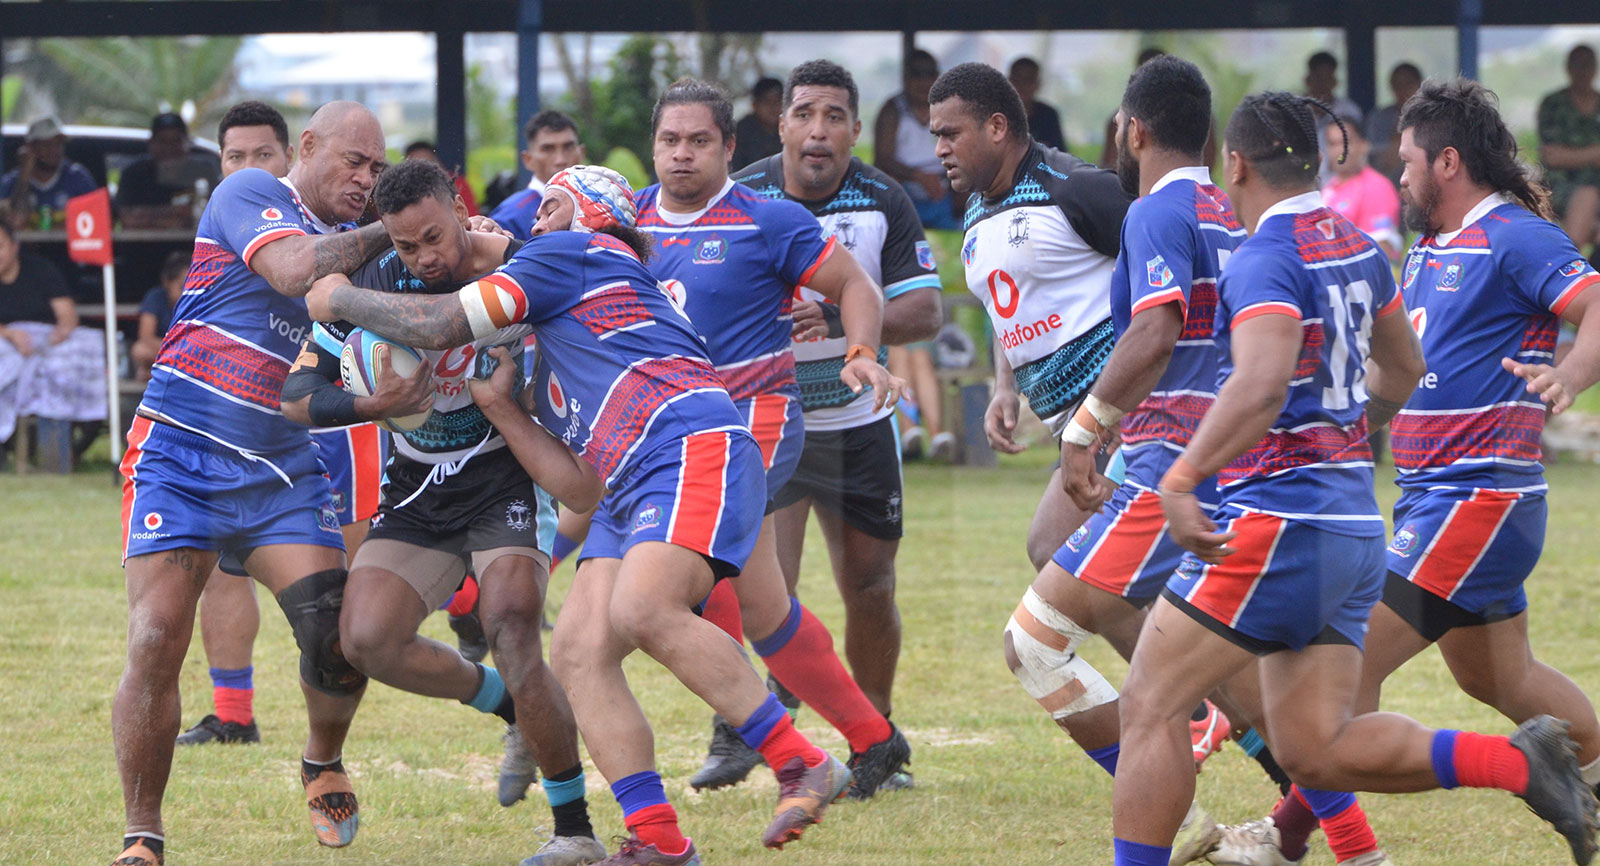 Tokouso 22 – Tabusoro 10 in Tri Nations 15s second match